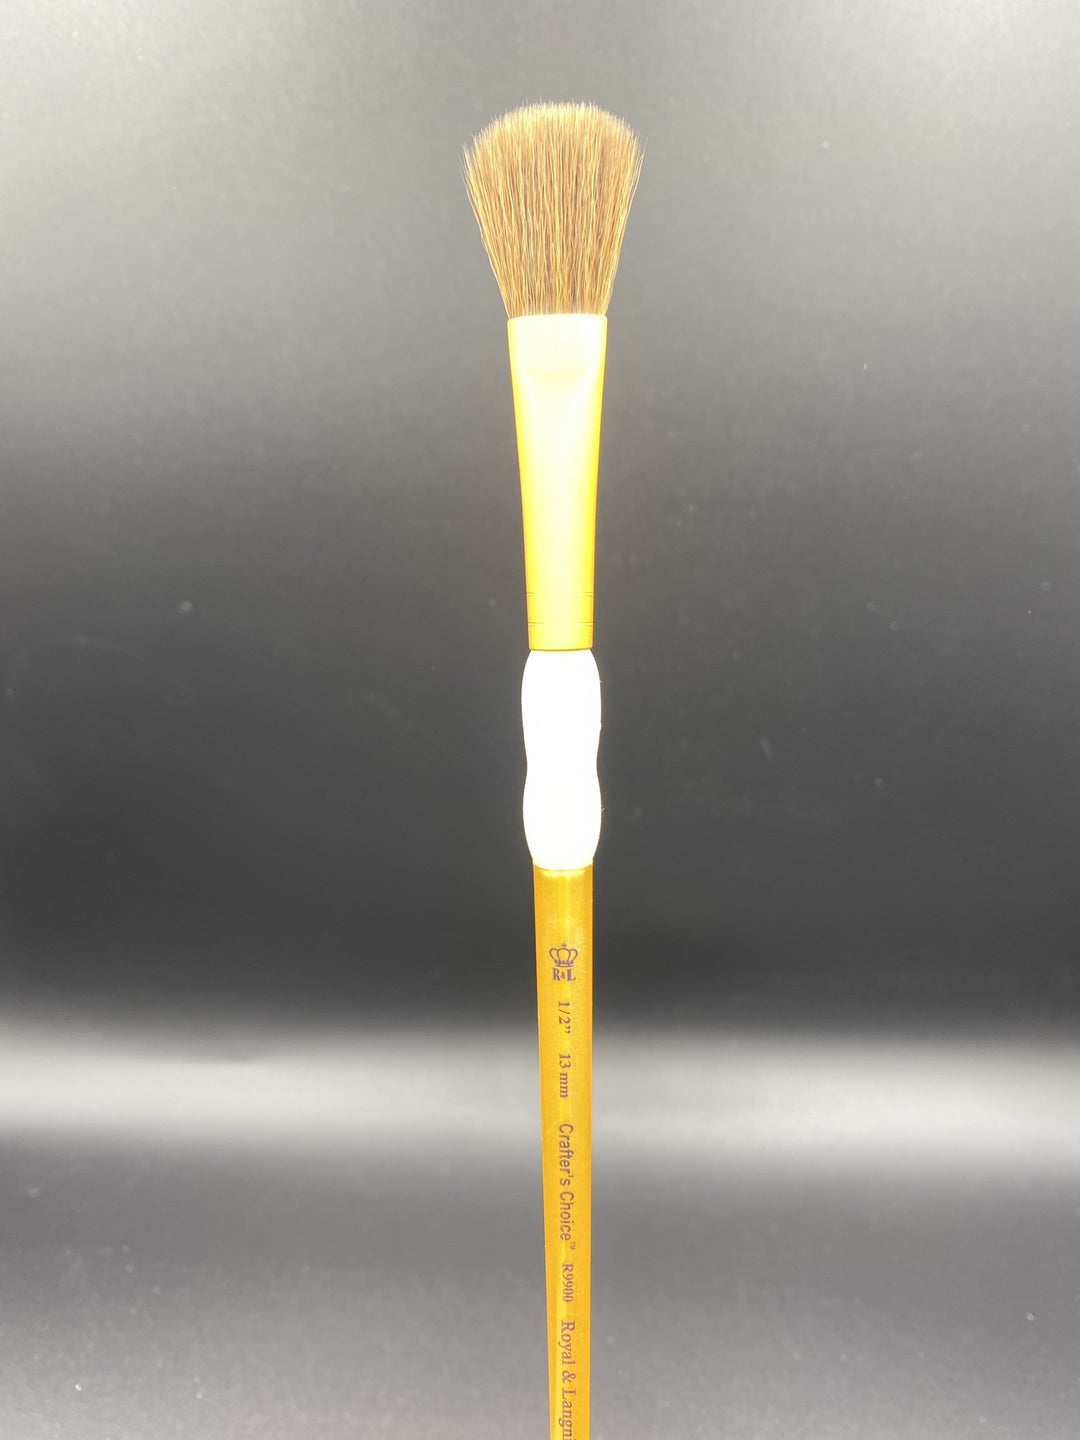 1/2" Crafters Choice Mop Brush